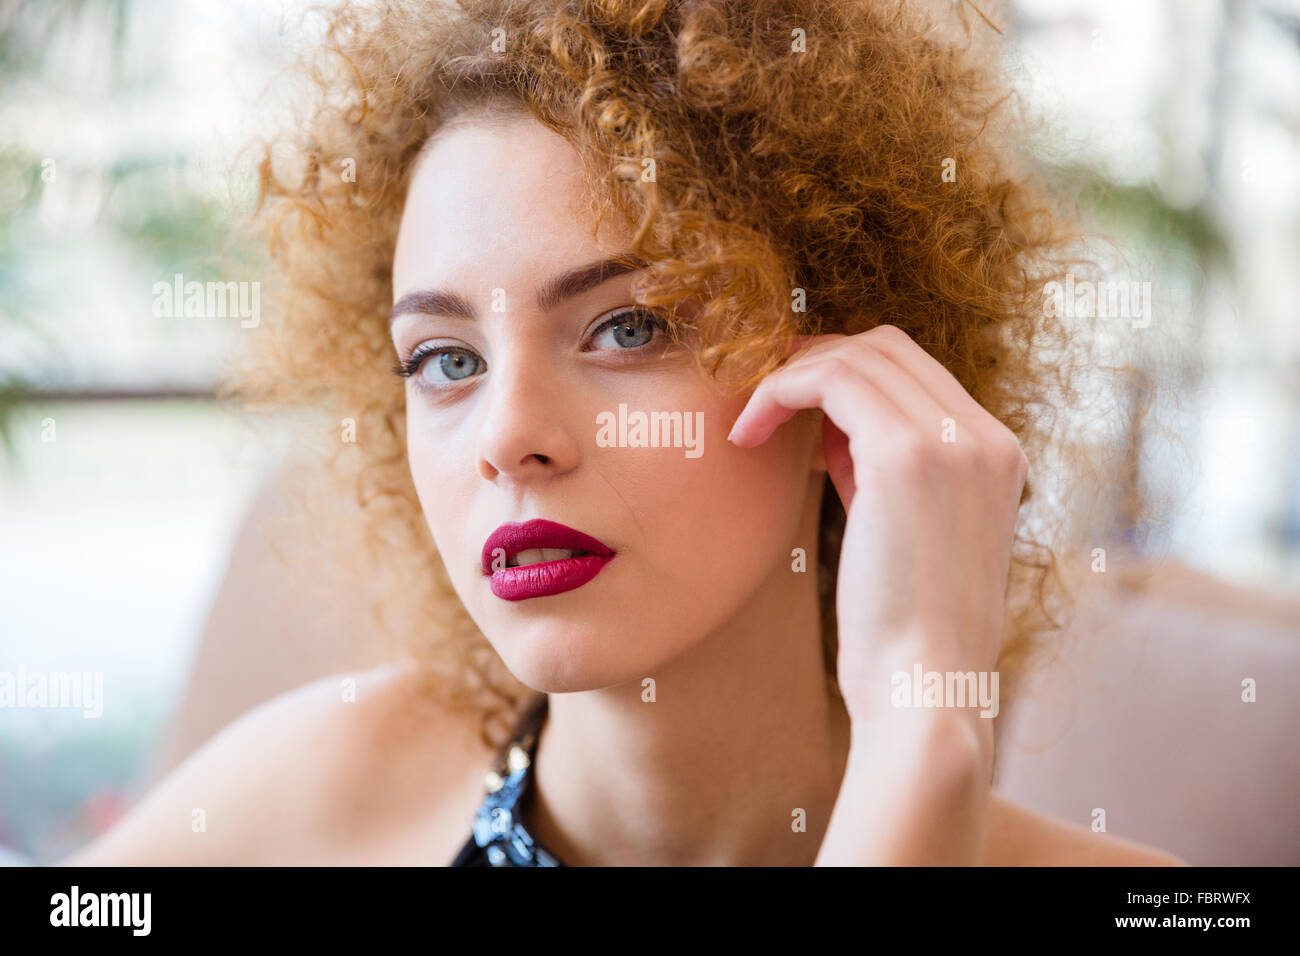 Closeup portrait of a beautiful redhead woman with curly hair looking at camera Stock Photo